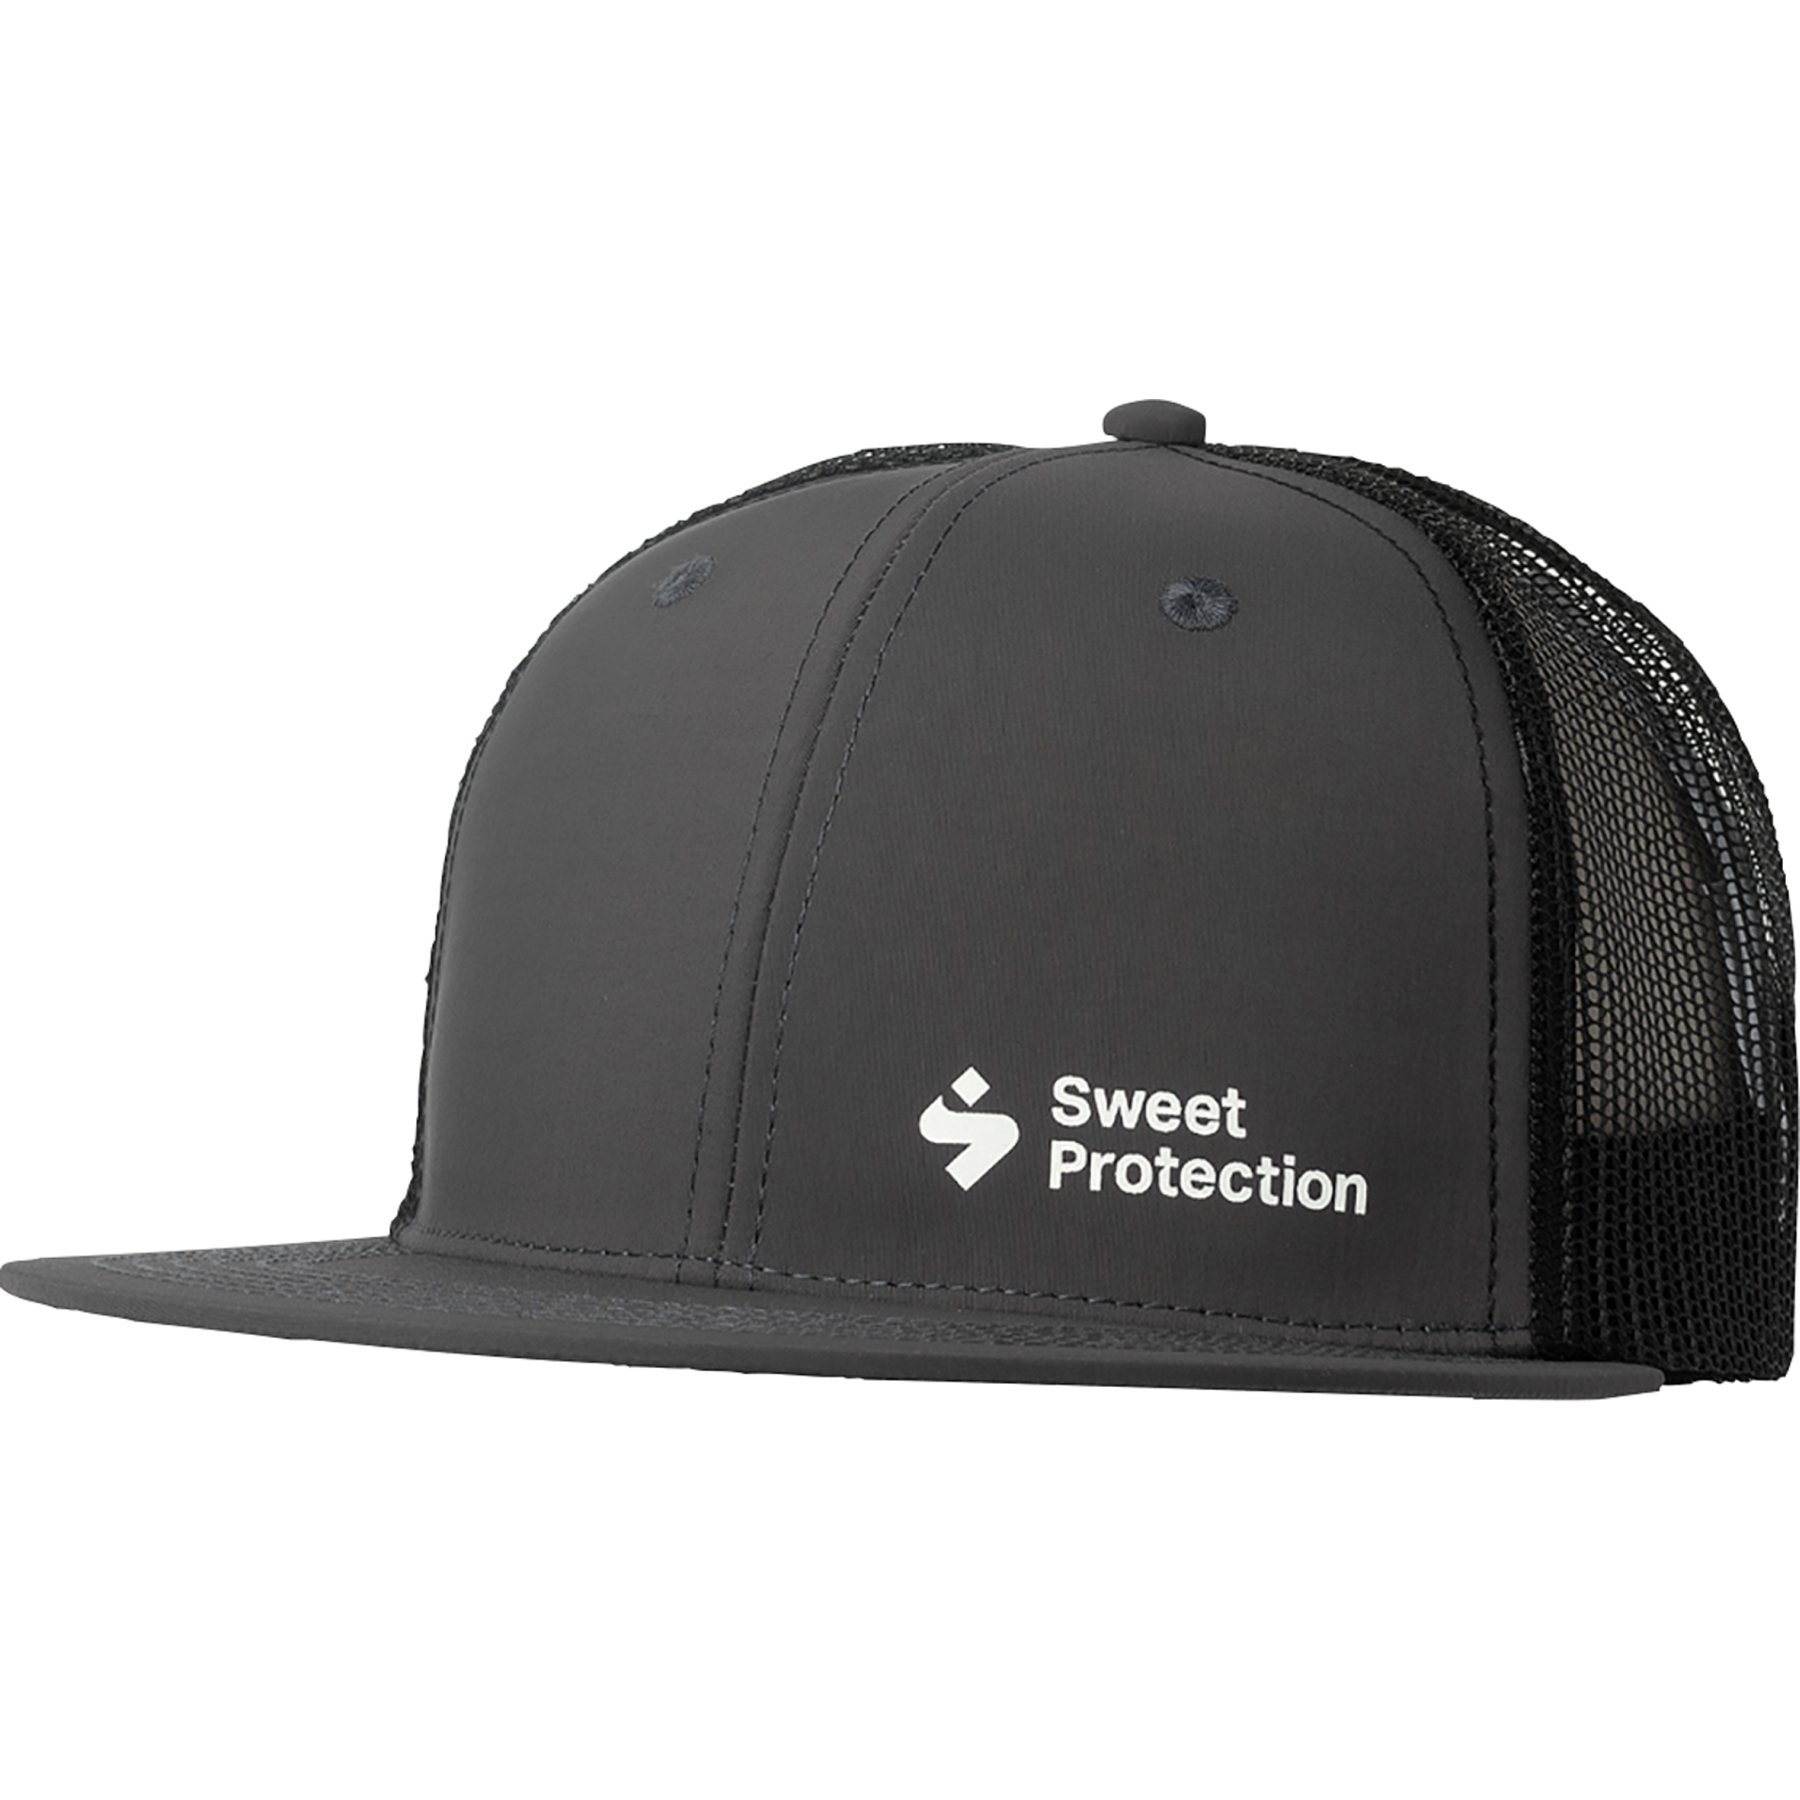 Picture of SWEET Protection Corporate Trucker Cap - Stone Gray